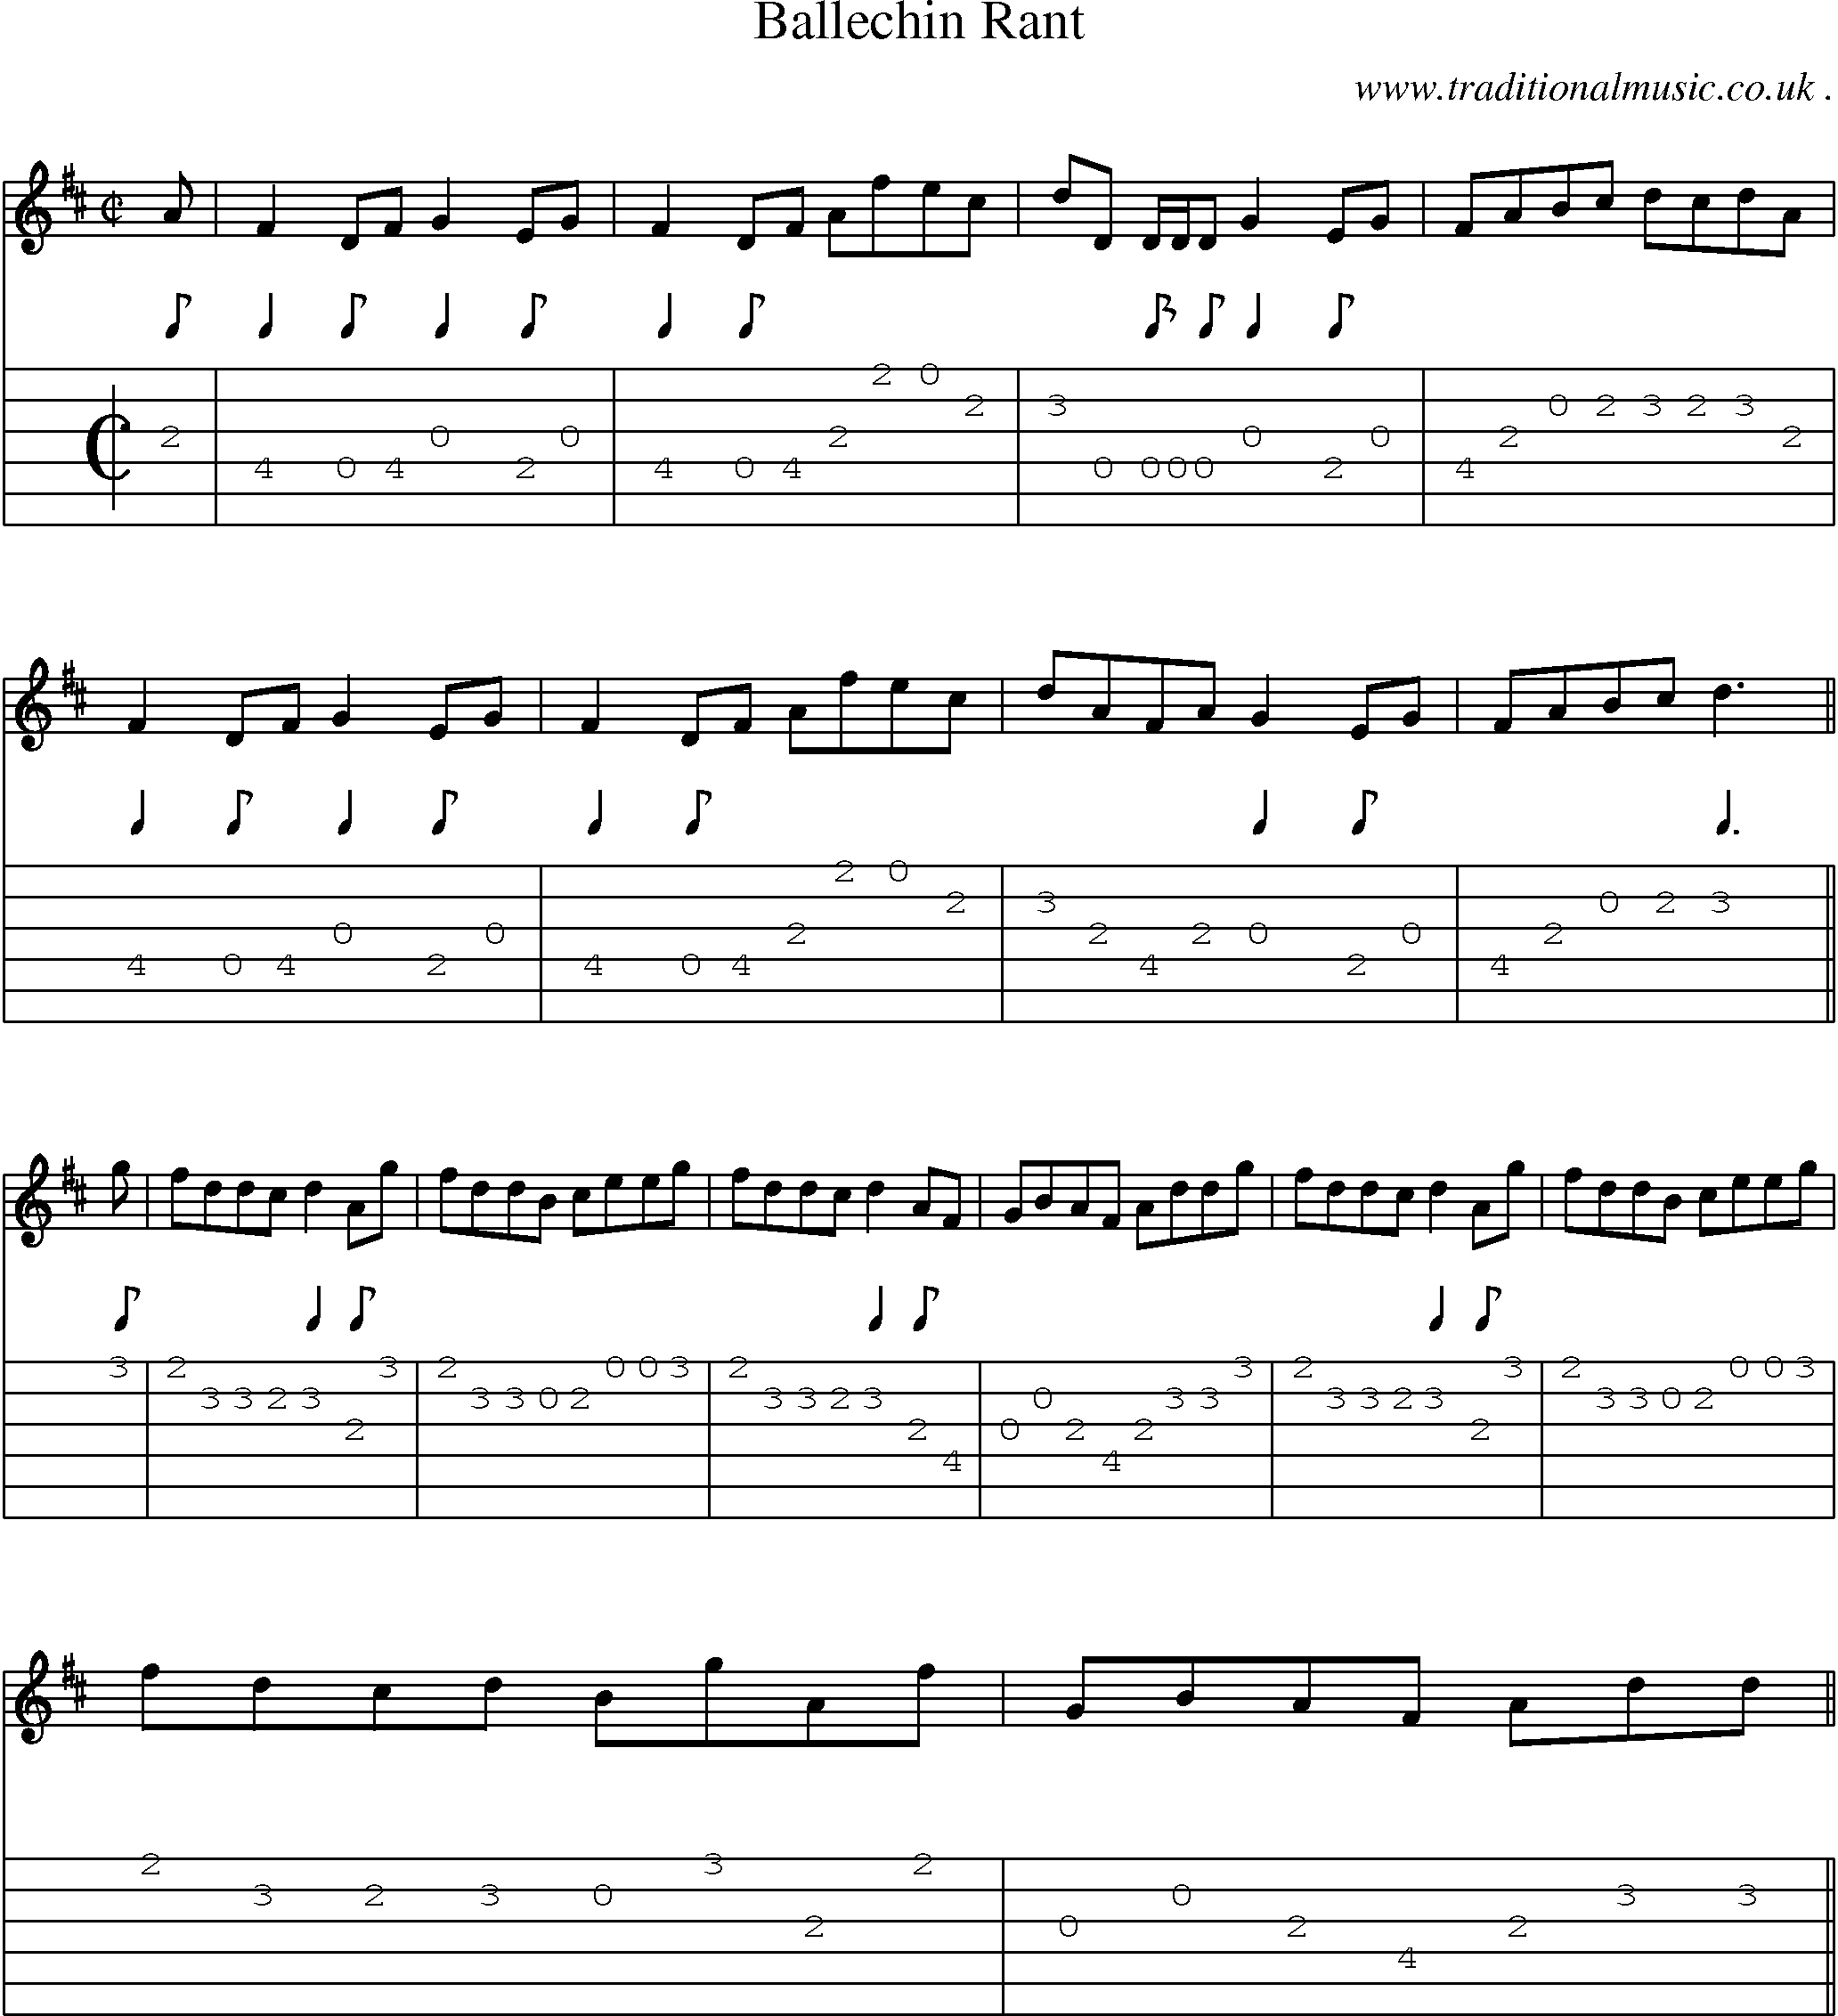 Sheet-music  score, Chords and Guitar Tabs for Ballechin Rant